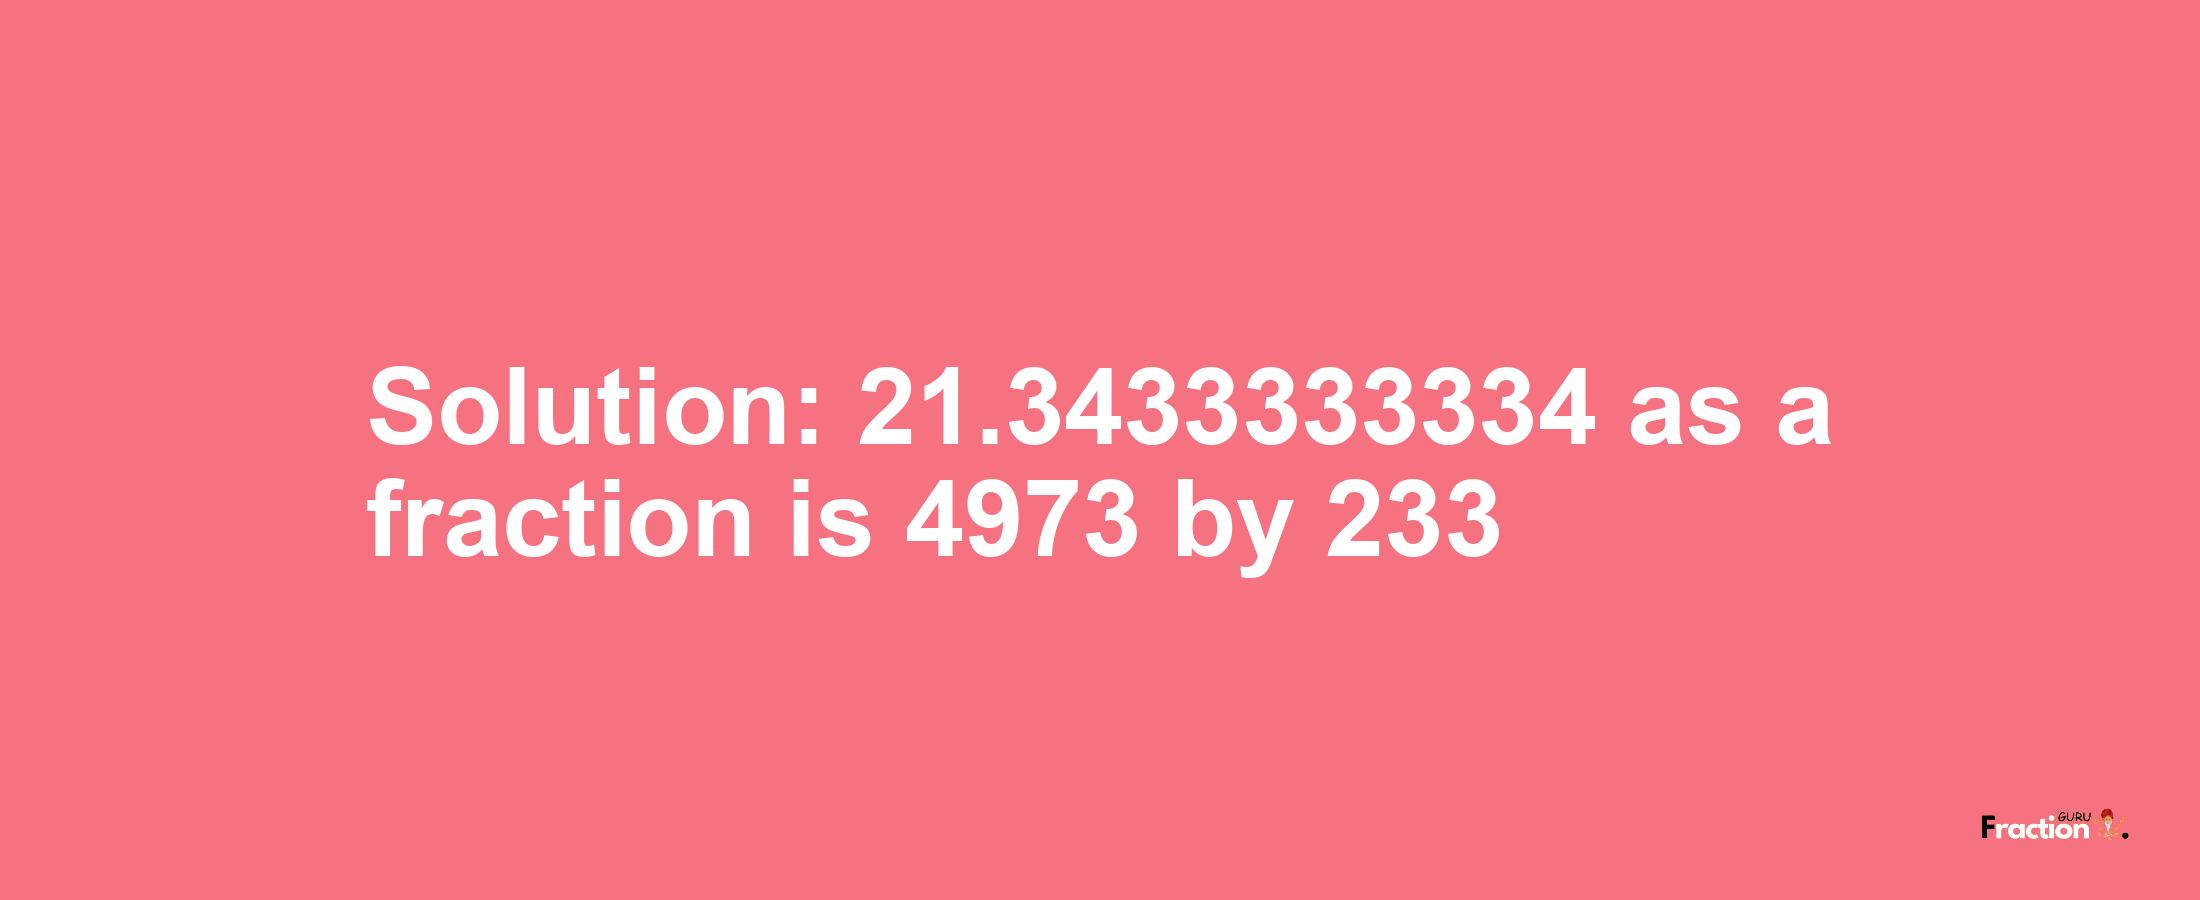 Solution:21.3433333334 as a fraction is 4973/233